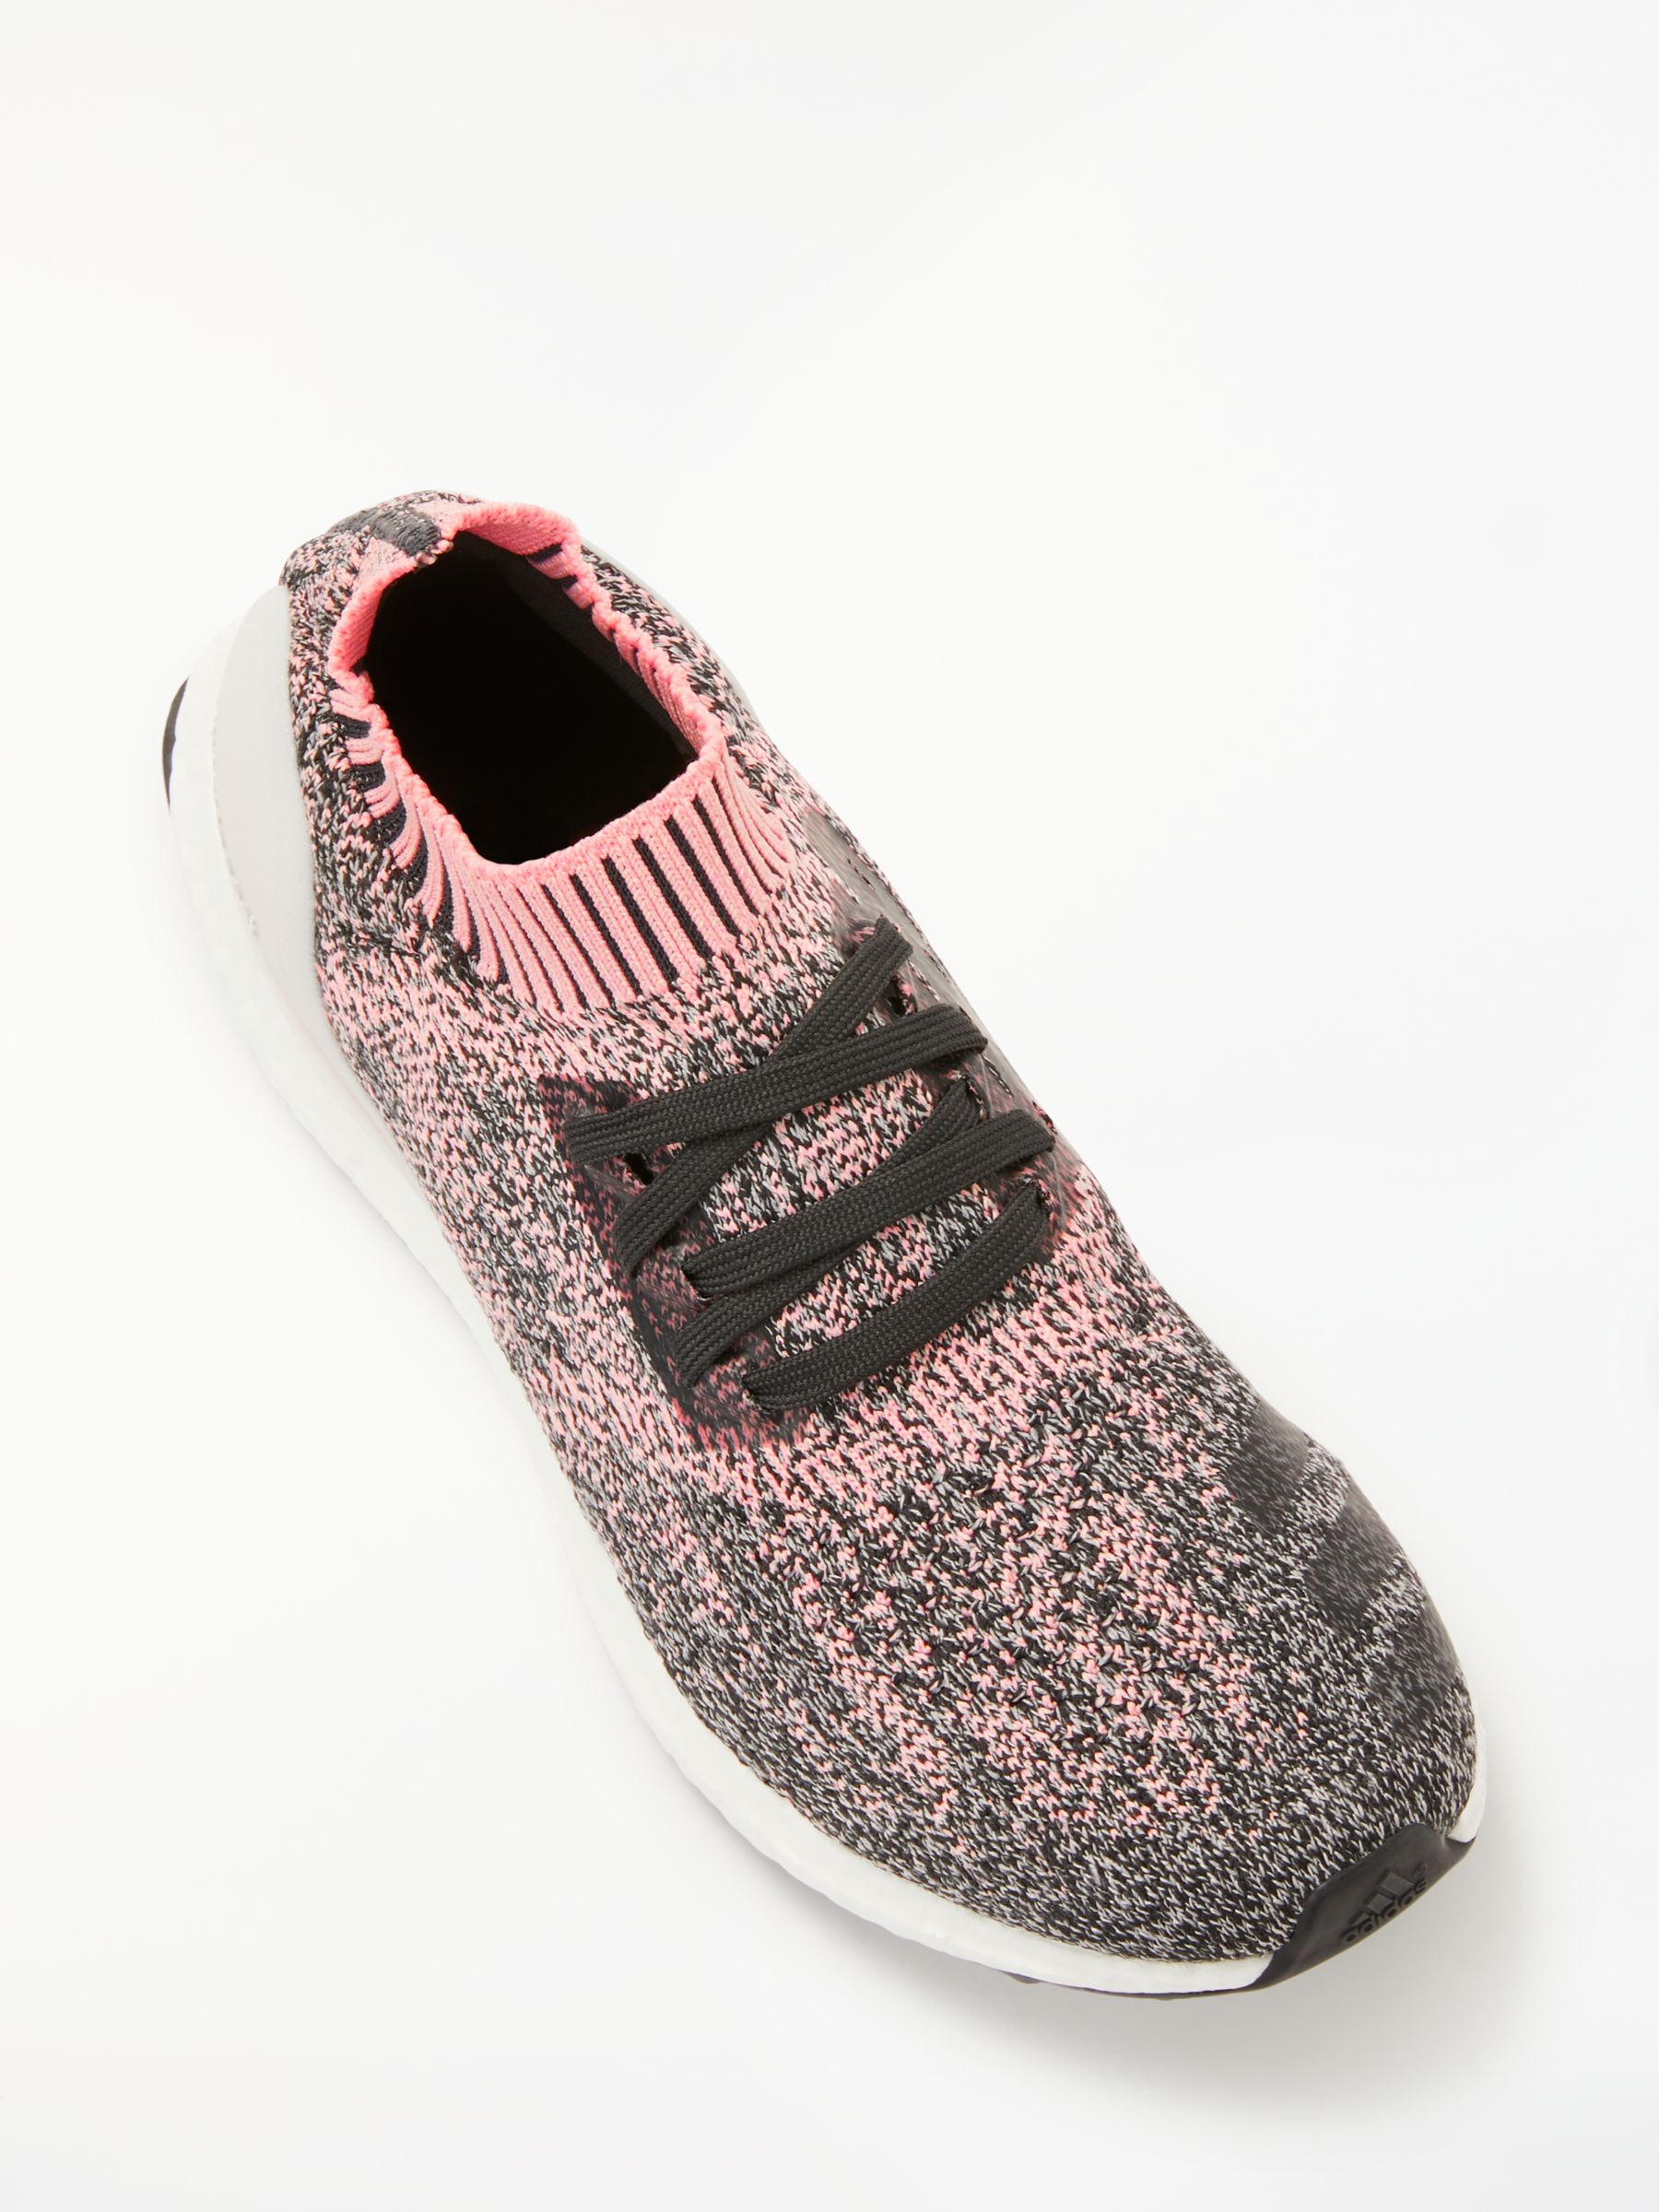 ultraboost uncaged shoes womens